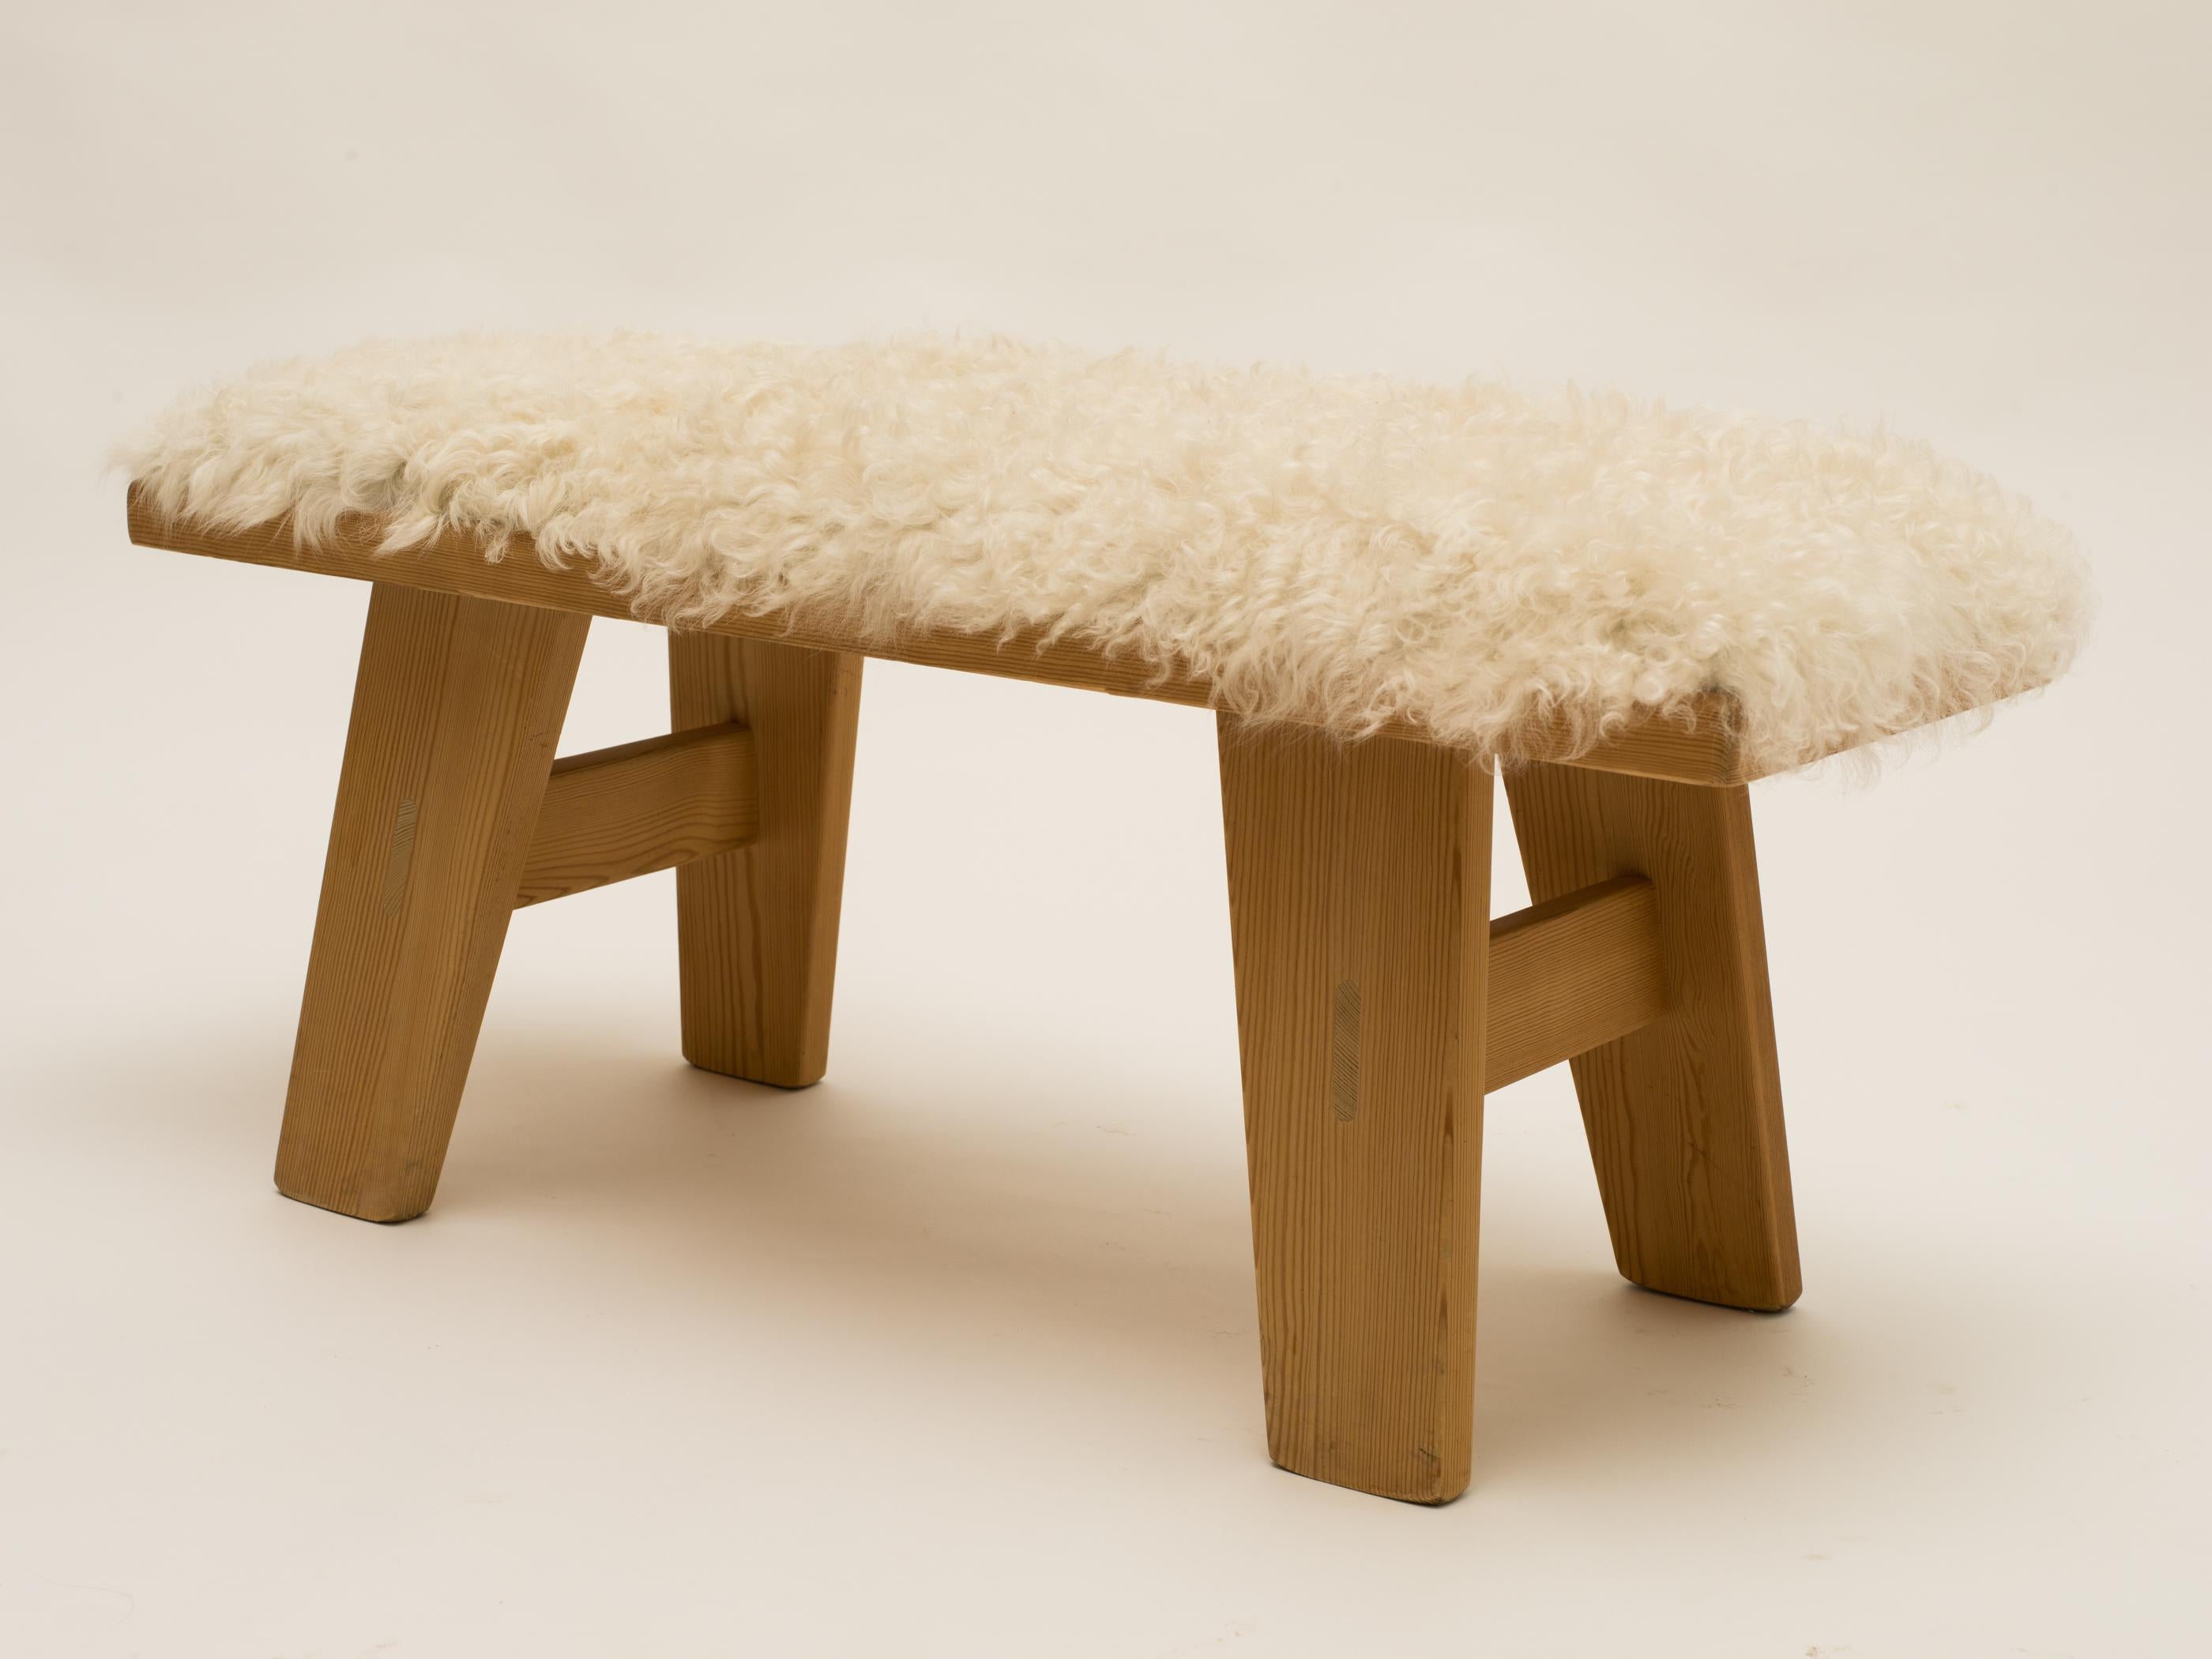 Scandinavian Modern sheepskin and pine bench by Krogenæs, Norway, 1960s Massive pine bench made by Krogenæs, Norway 1960s, with new upholstery in long haired sheepskin. The beautifully colored & grained vintage pine matches well with the soft